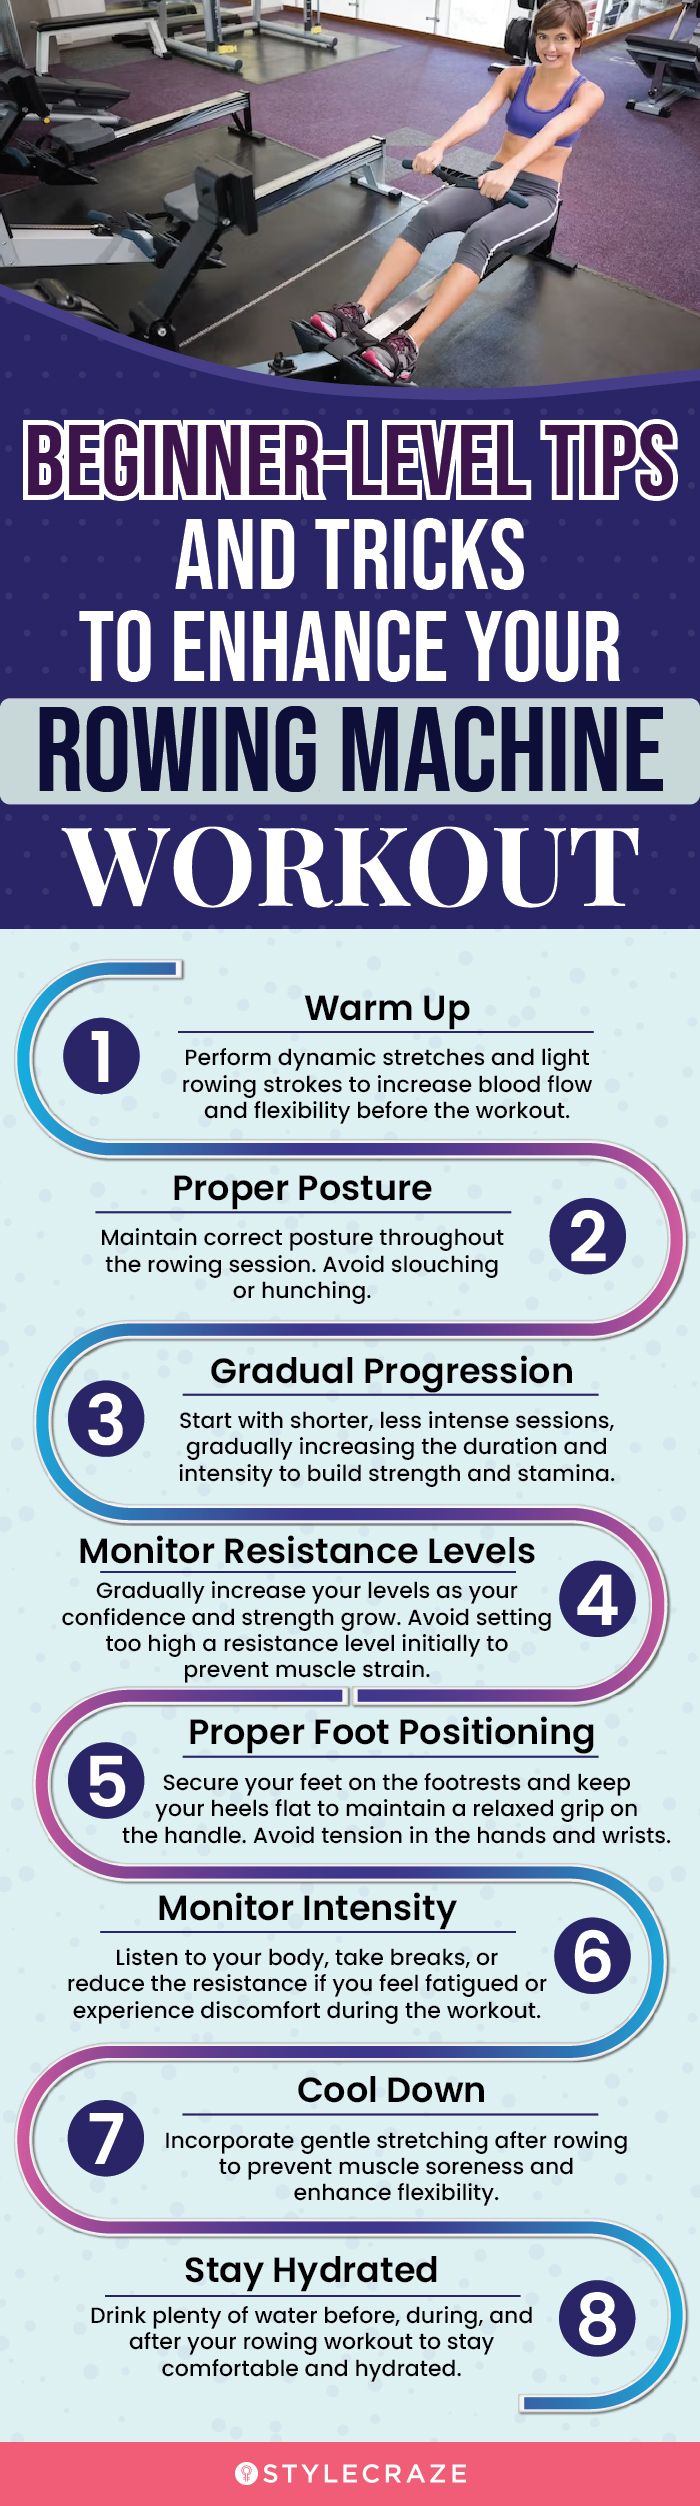 Beginner-Level Tips And Tricks To Enhance Your Rowing Machine Workout (infographic)